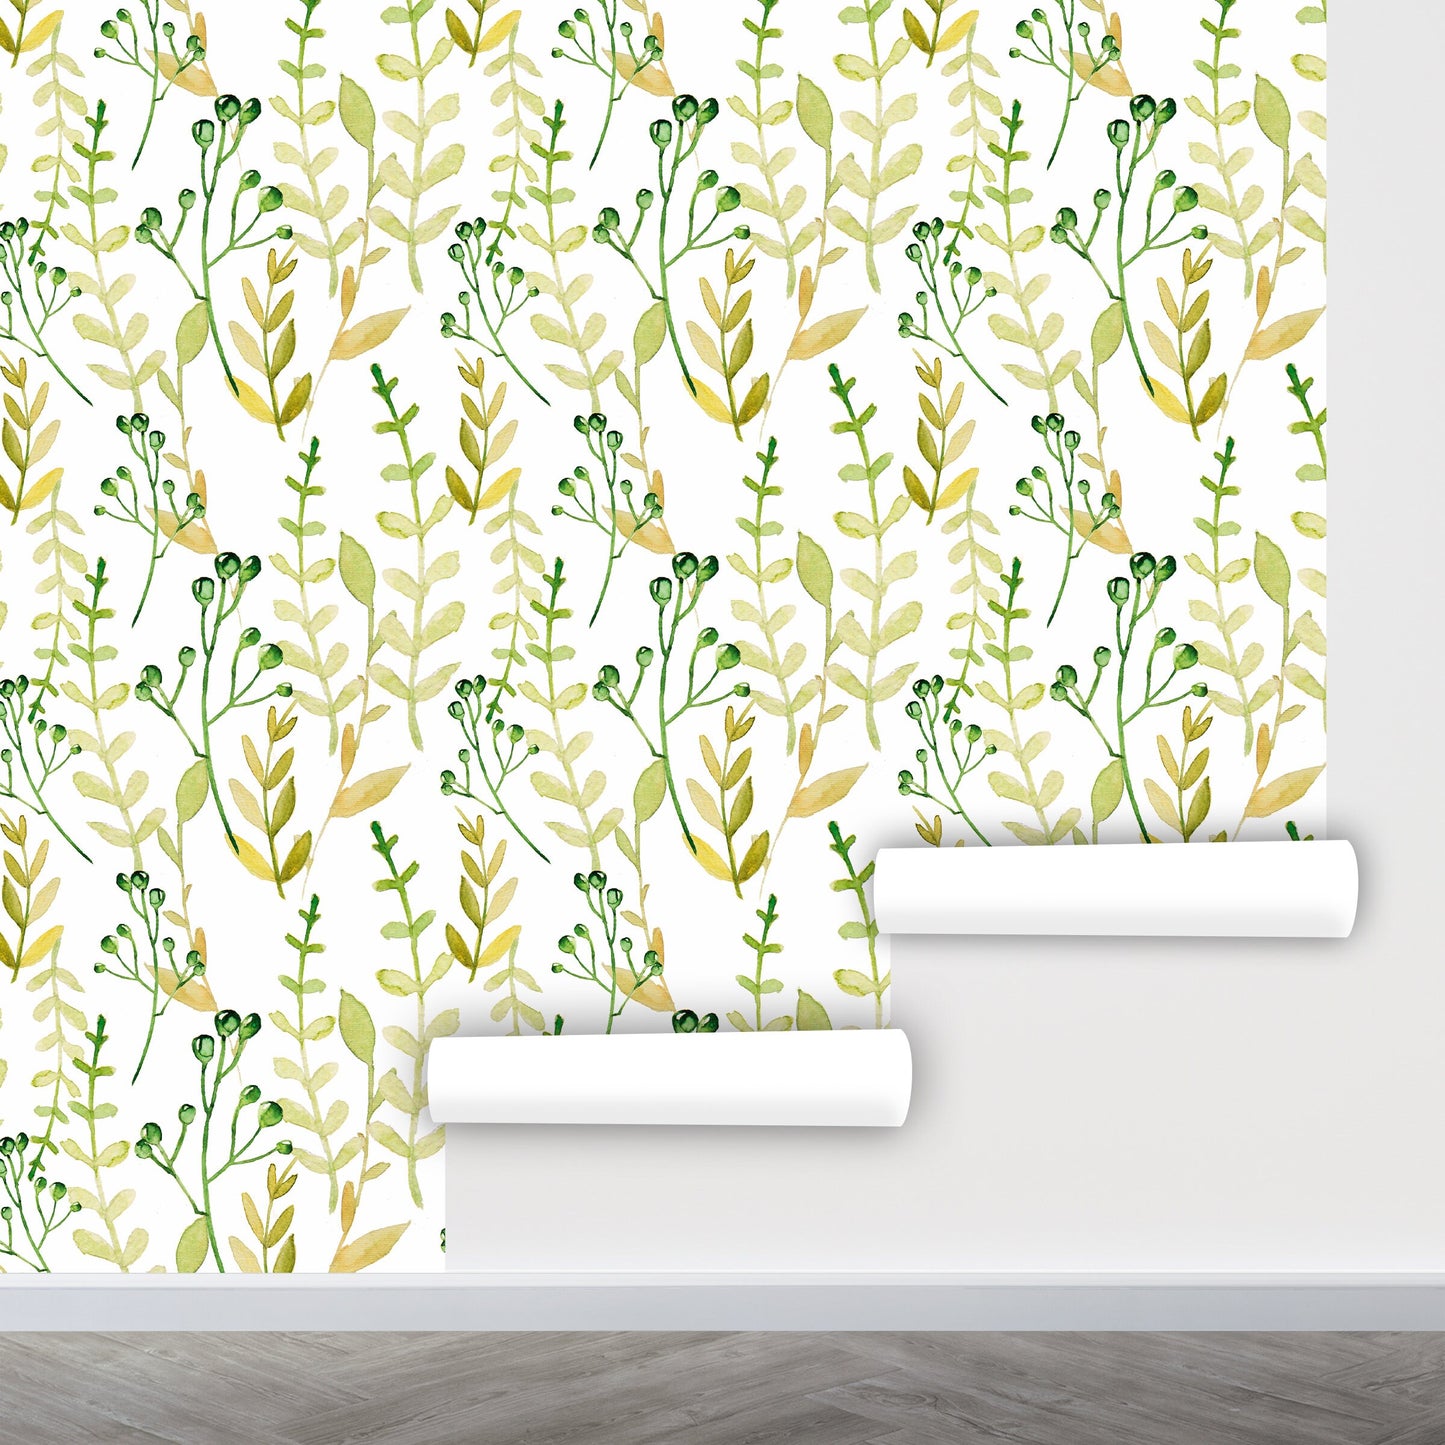 Green Leaf Wallpaper Peel and Stick, Botanical Wallpaper, Watercolor Wallpaper, Removable Wall Paper